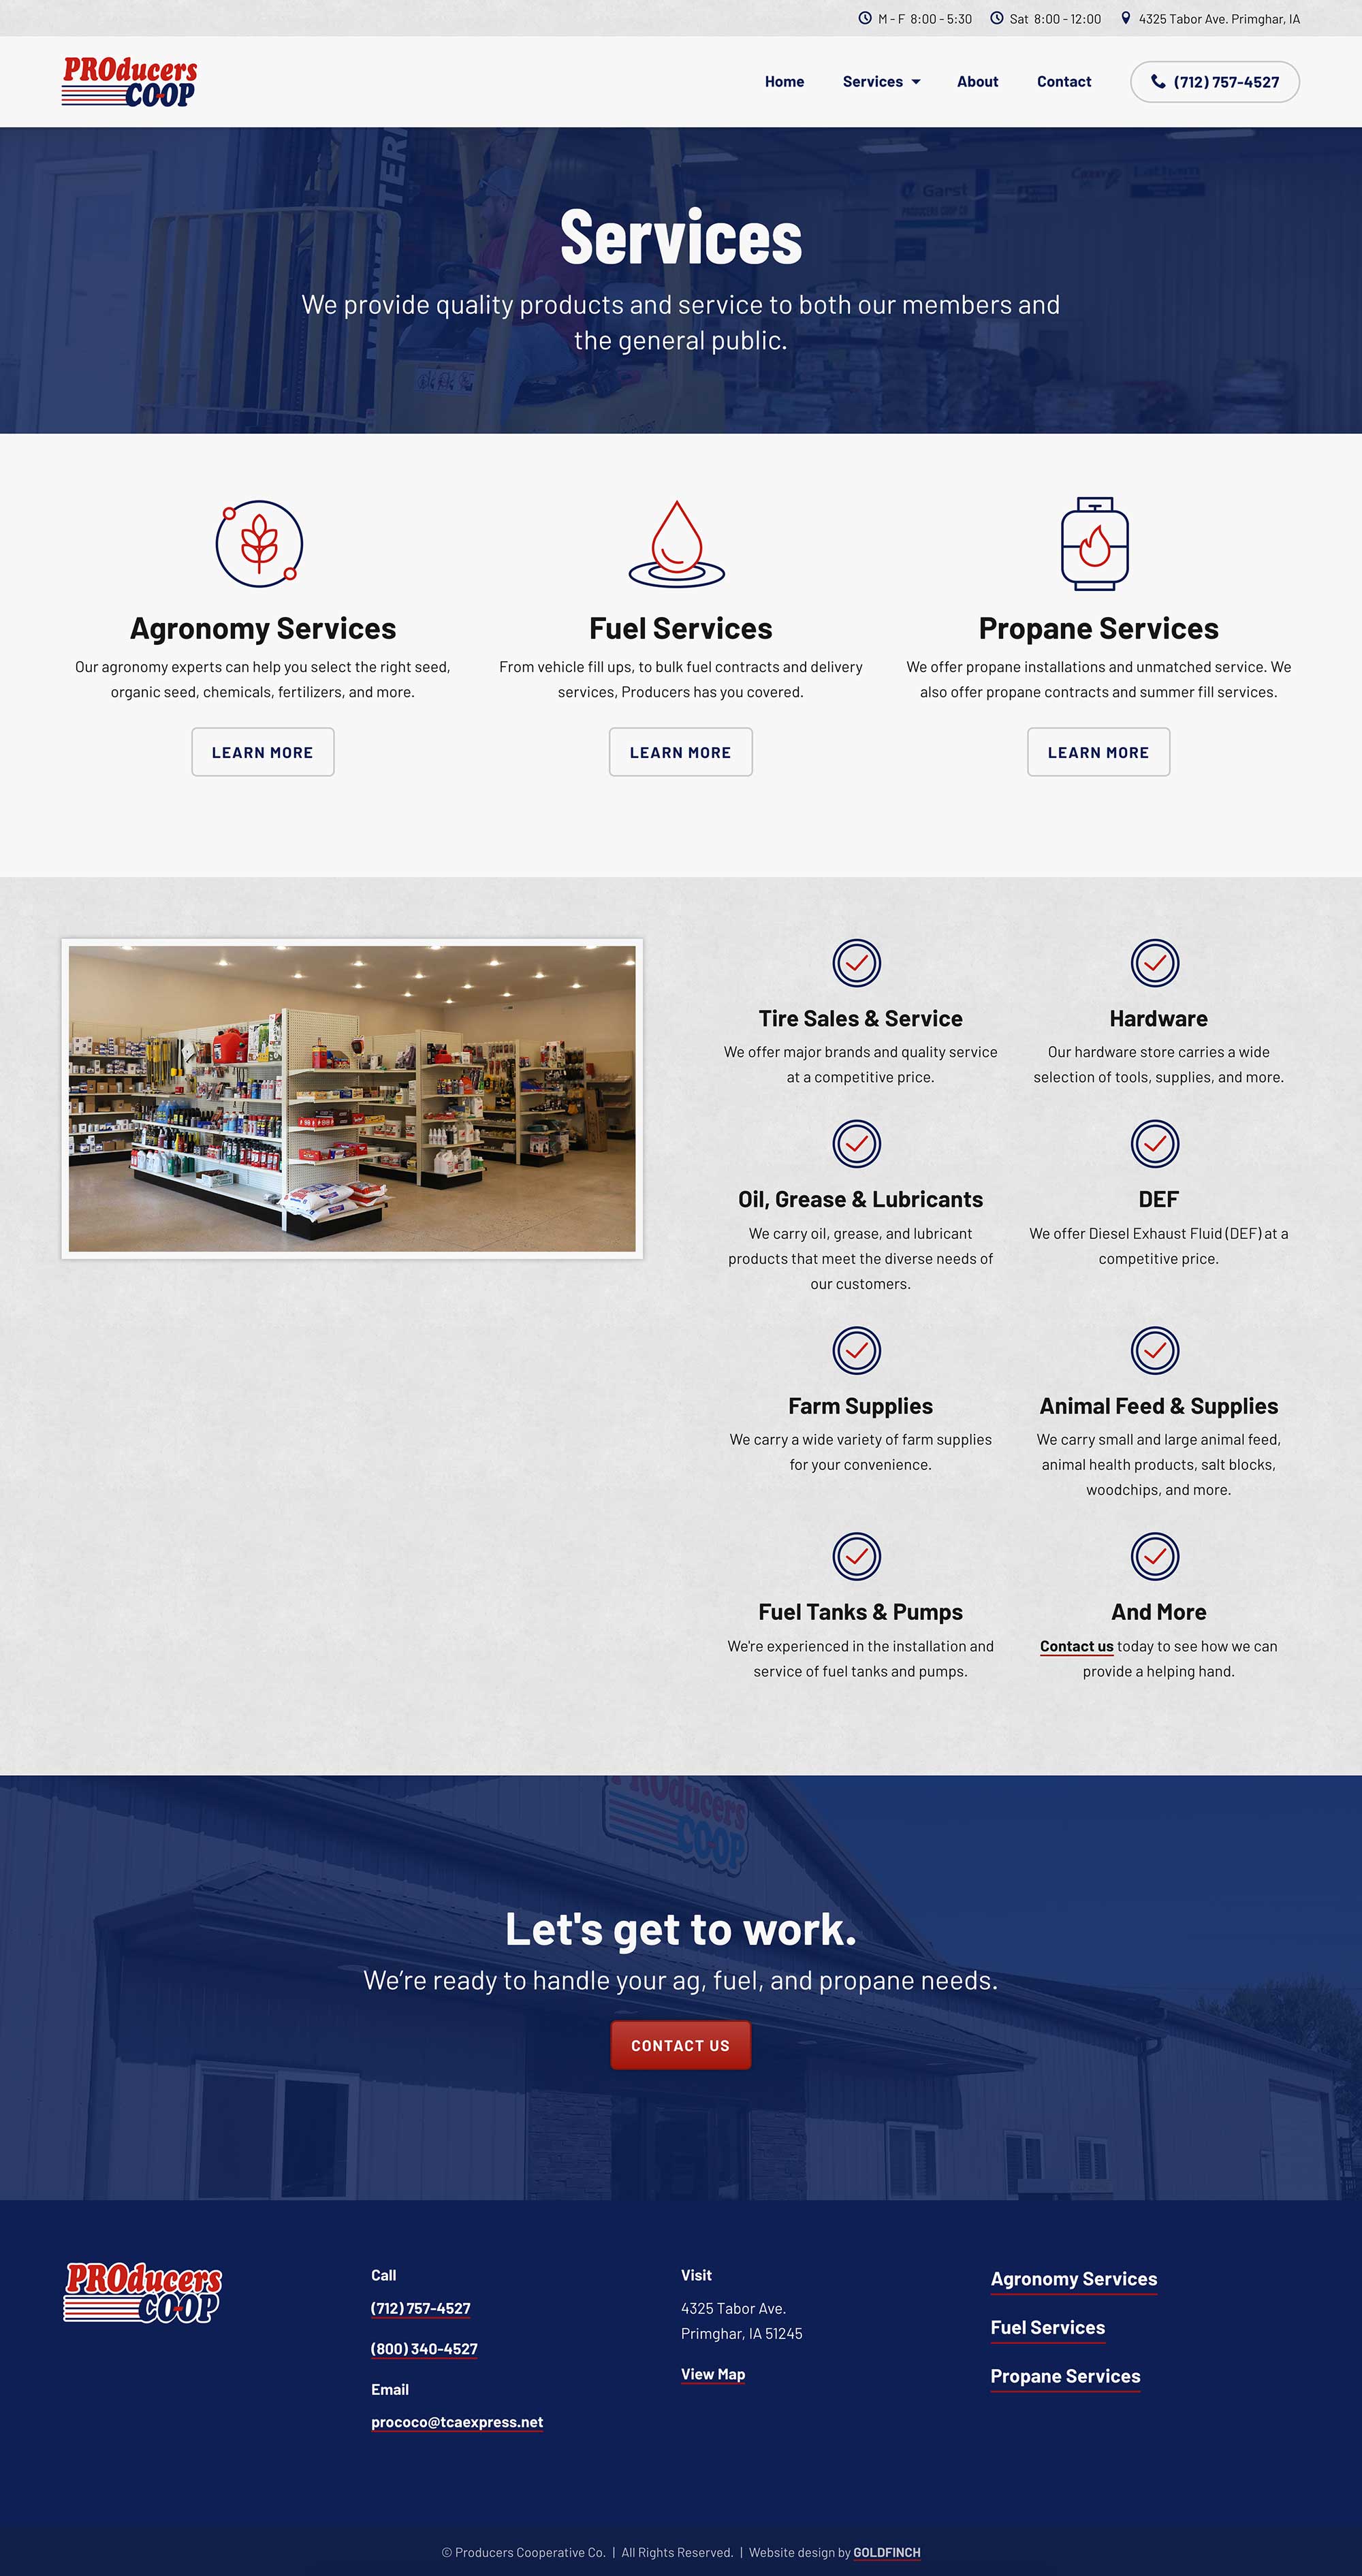 Producers Coop Services Page Web Design